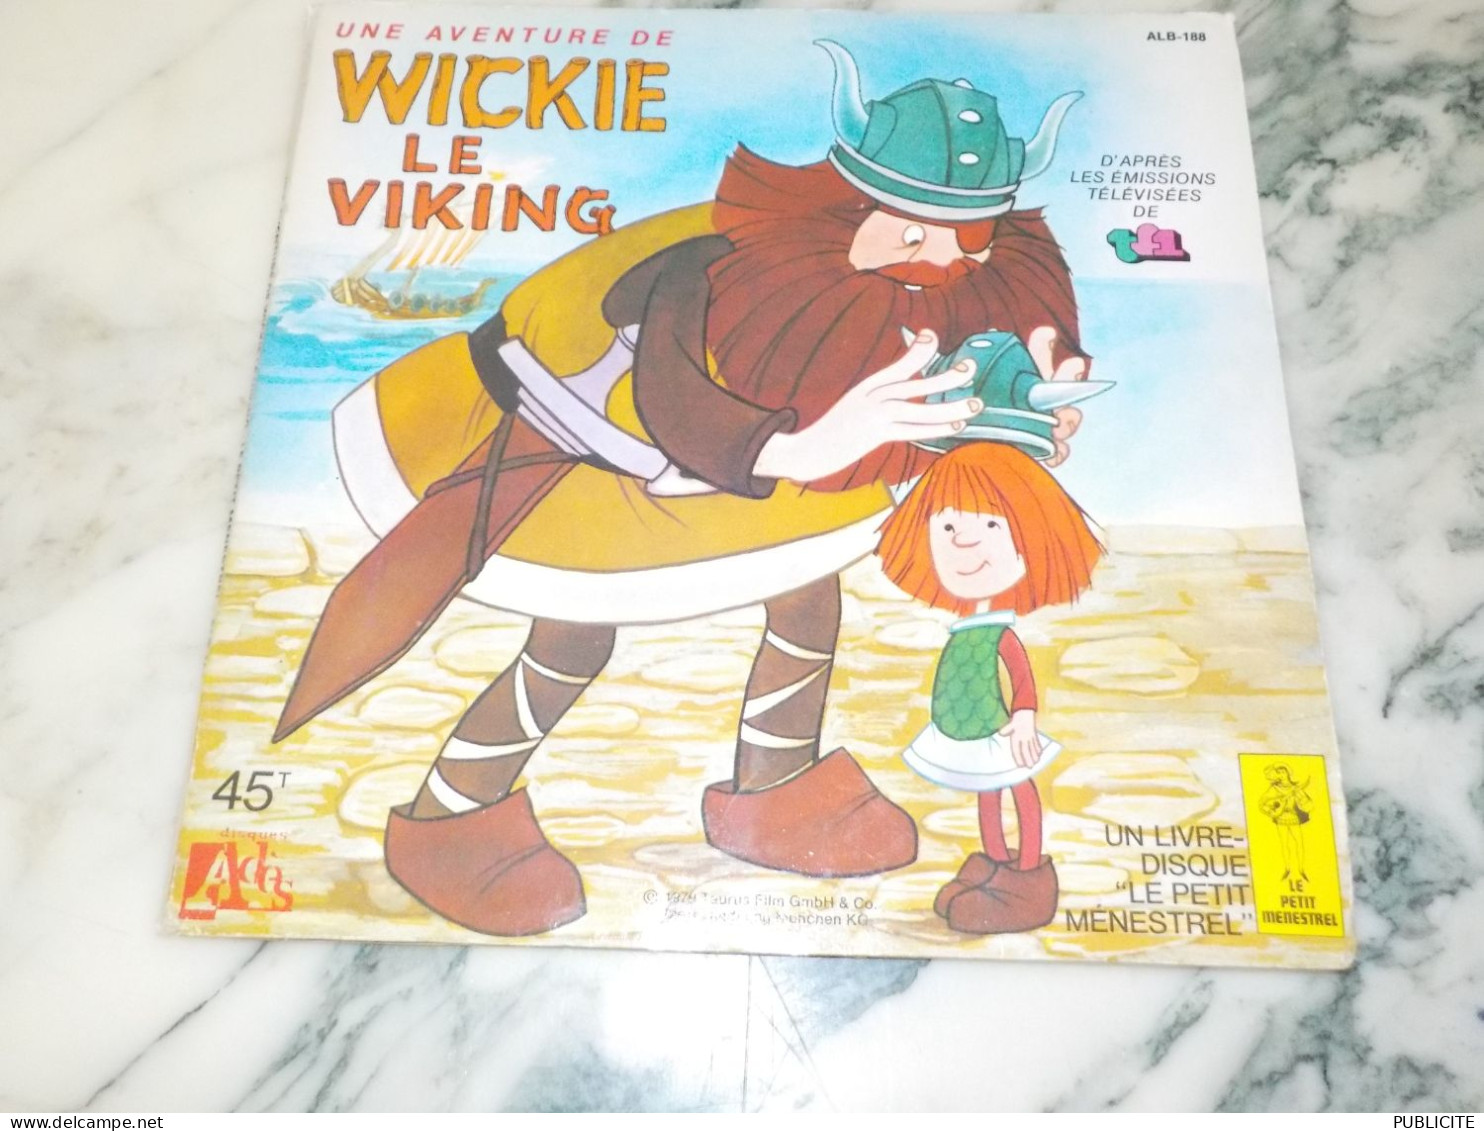 45 TOURS WICKIE LE VIKING 1979 - Children